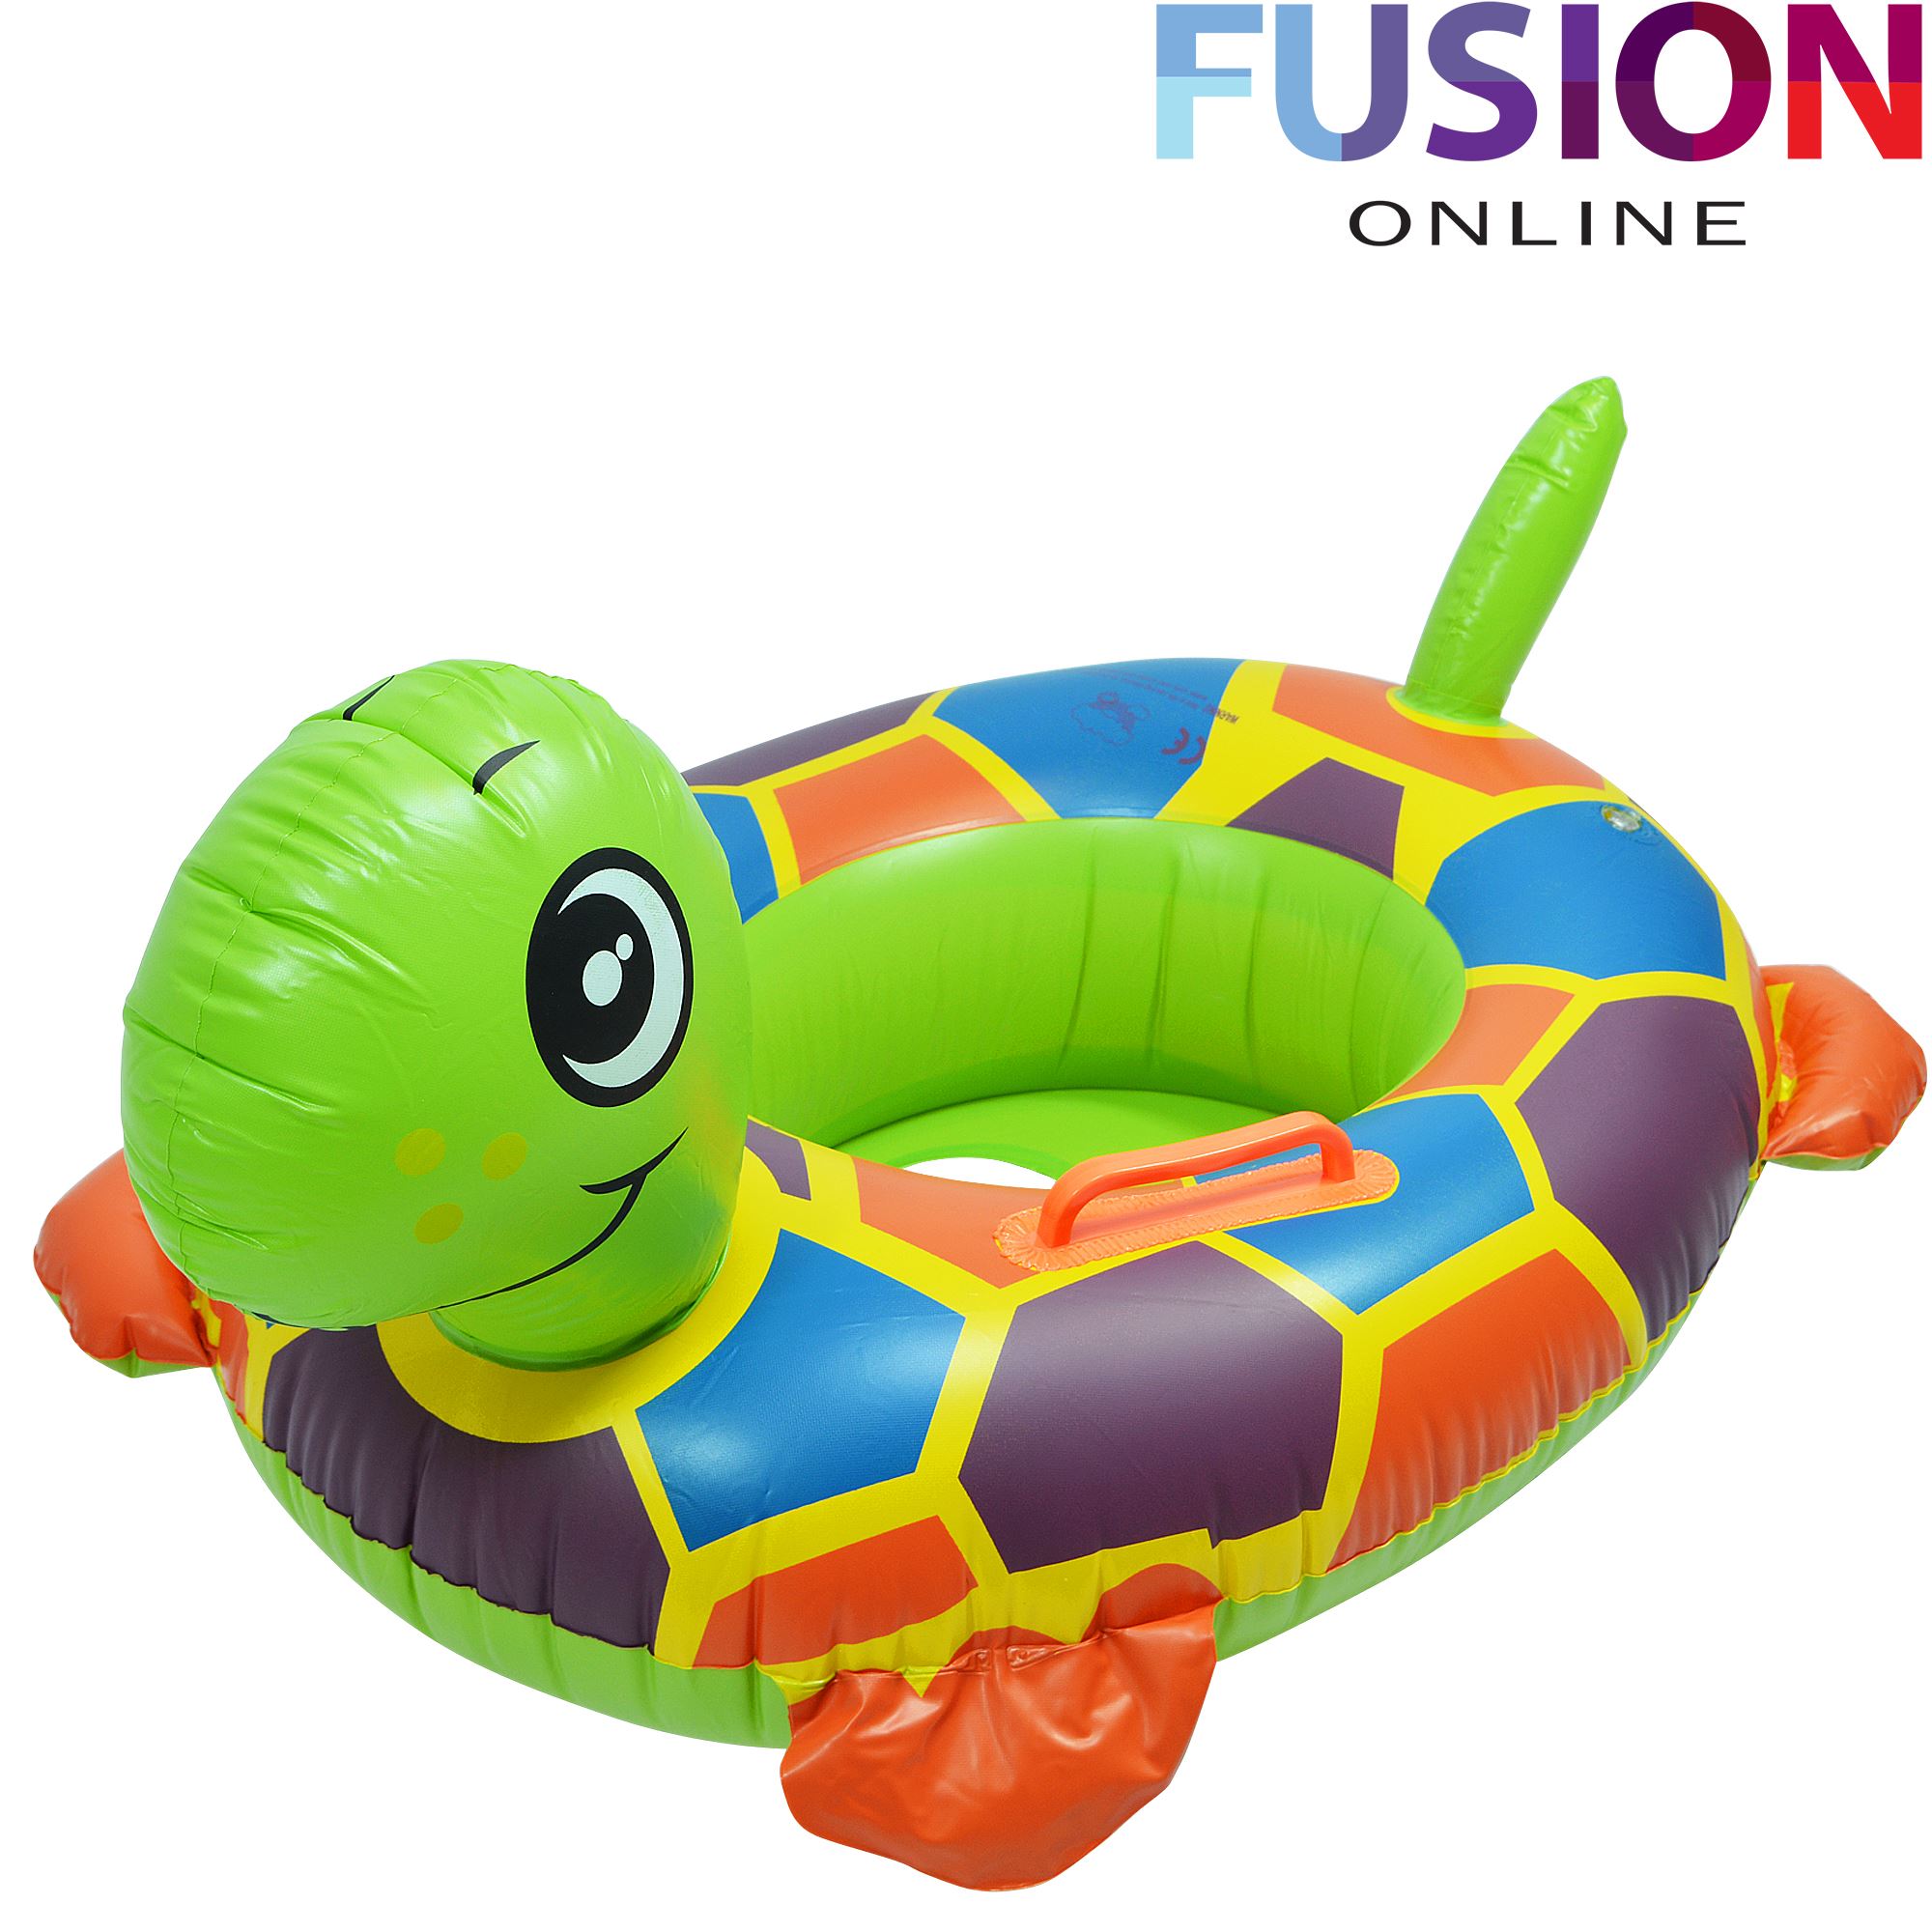 INFLATABLE SWIMMING RING TUBE BEACH SWIM POOL AID TOYS FLOAT RING ...